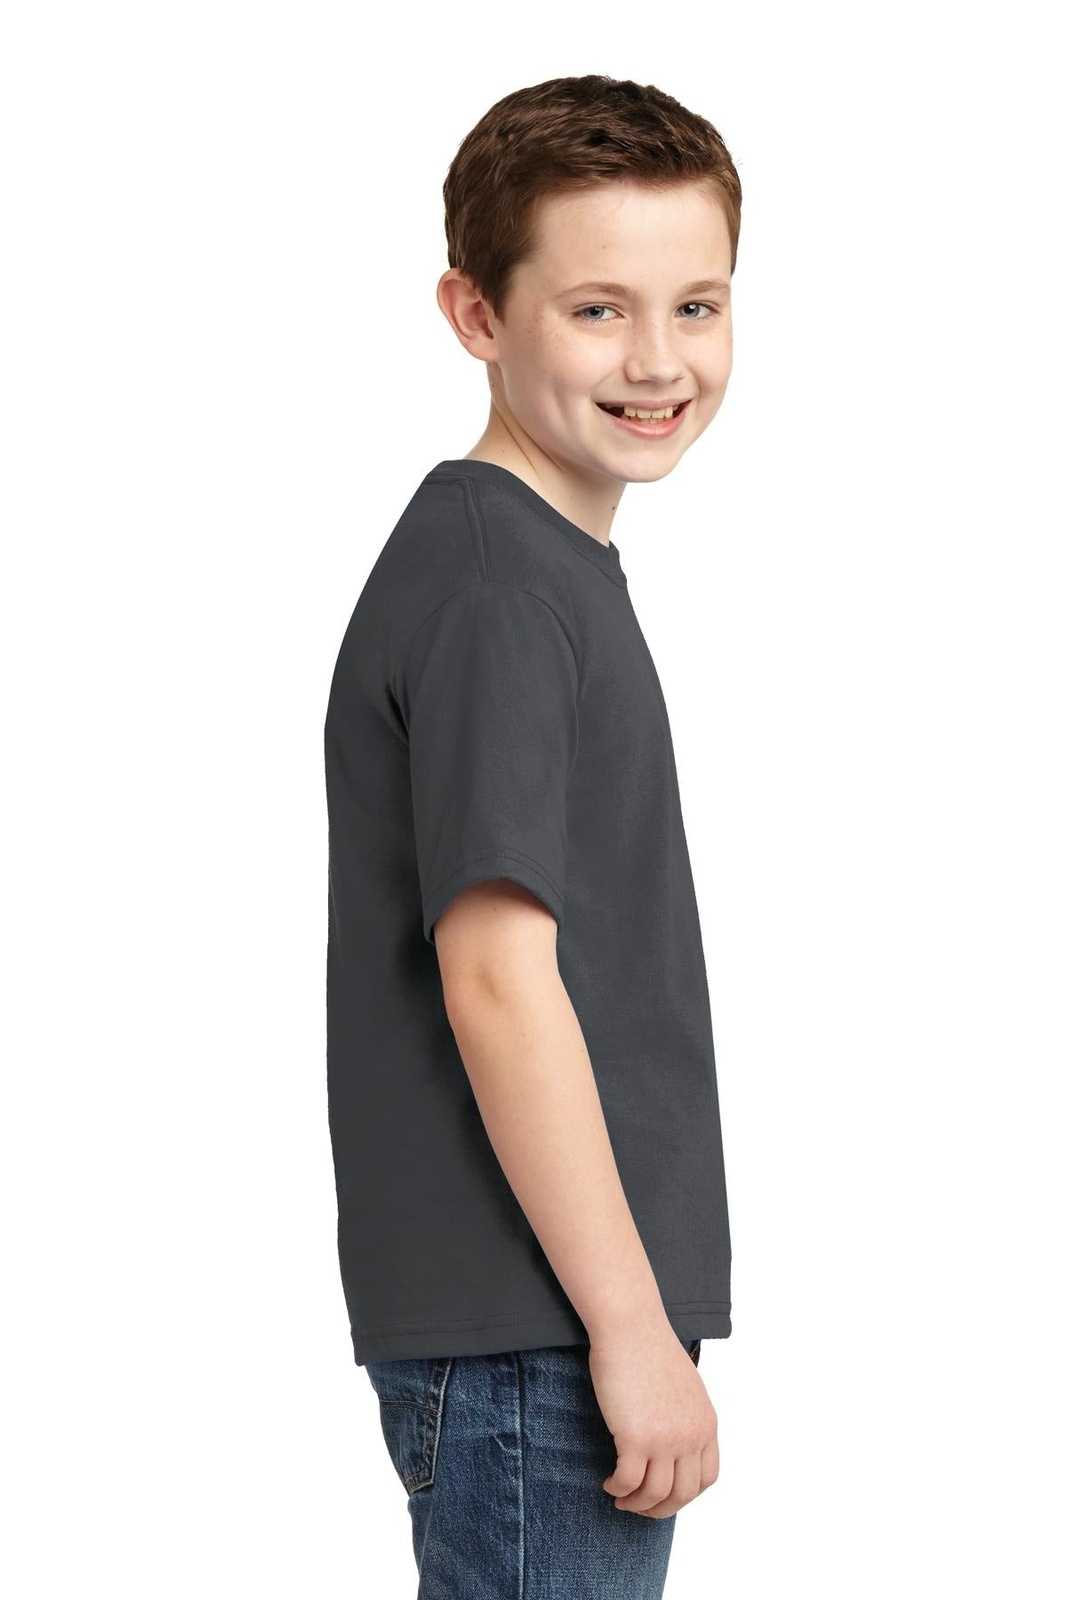 Jerzees 29B Youth Dri-Power 50/50 Cotton/Poly T-Shirt - Charcoal Gray - HIT a Double